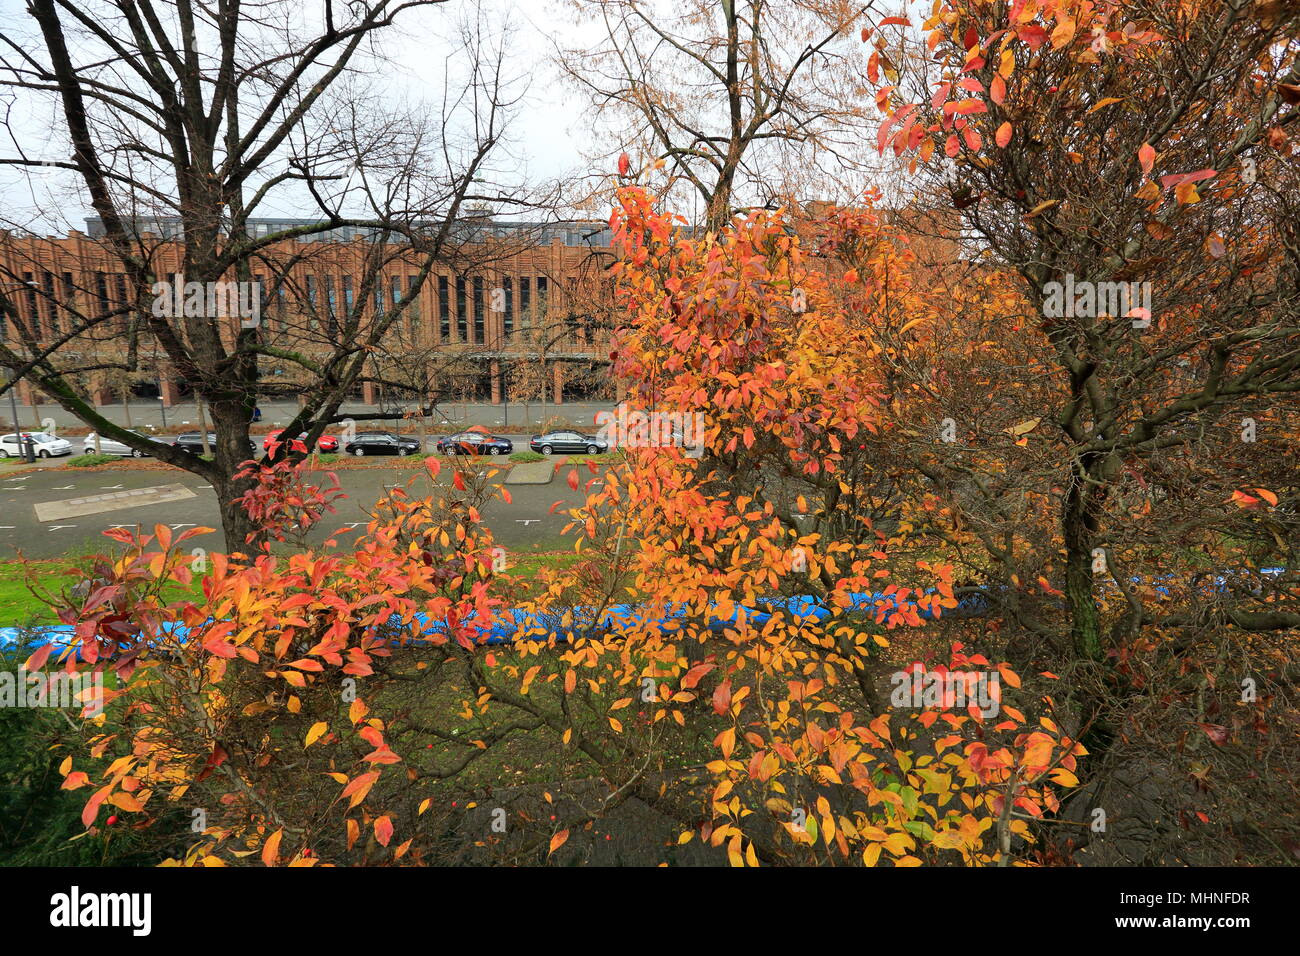 Colorful leaves on trees during autumn in Cologne, Northrhine-Westfalia, Germany. Stock Photo